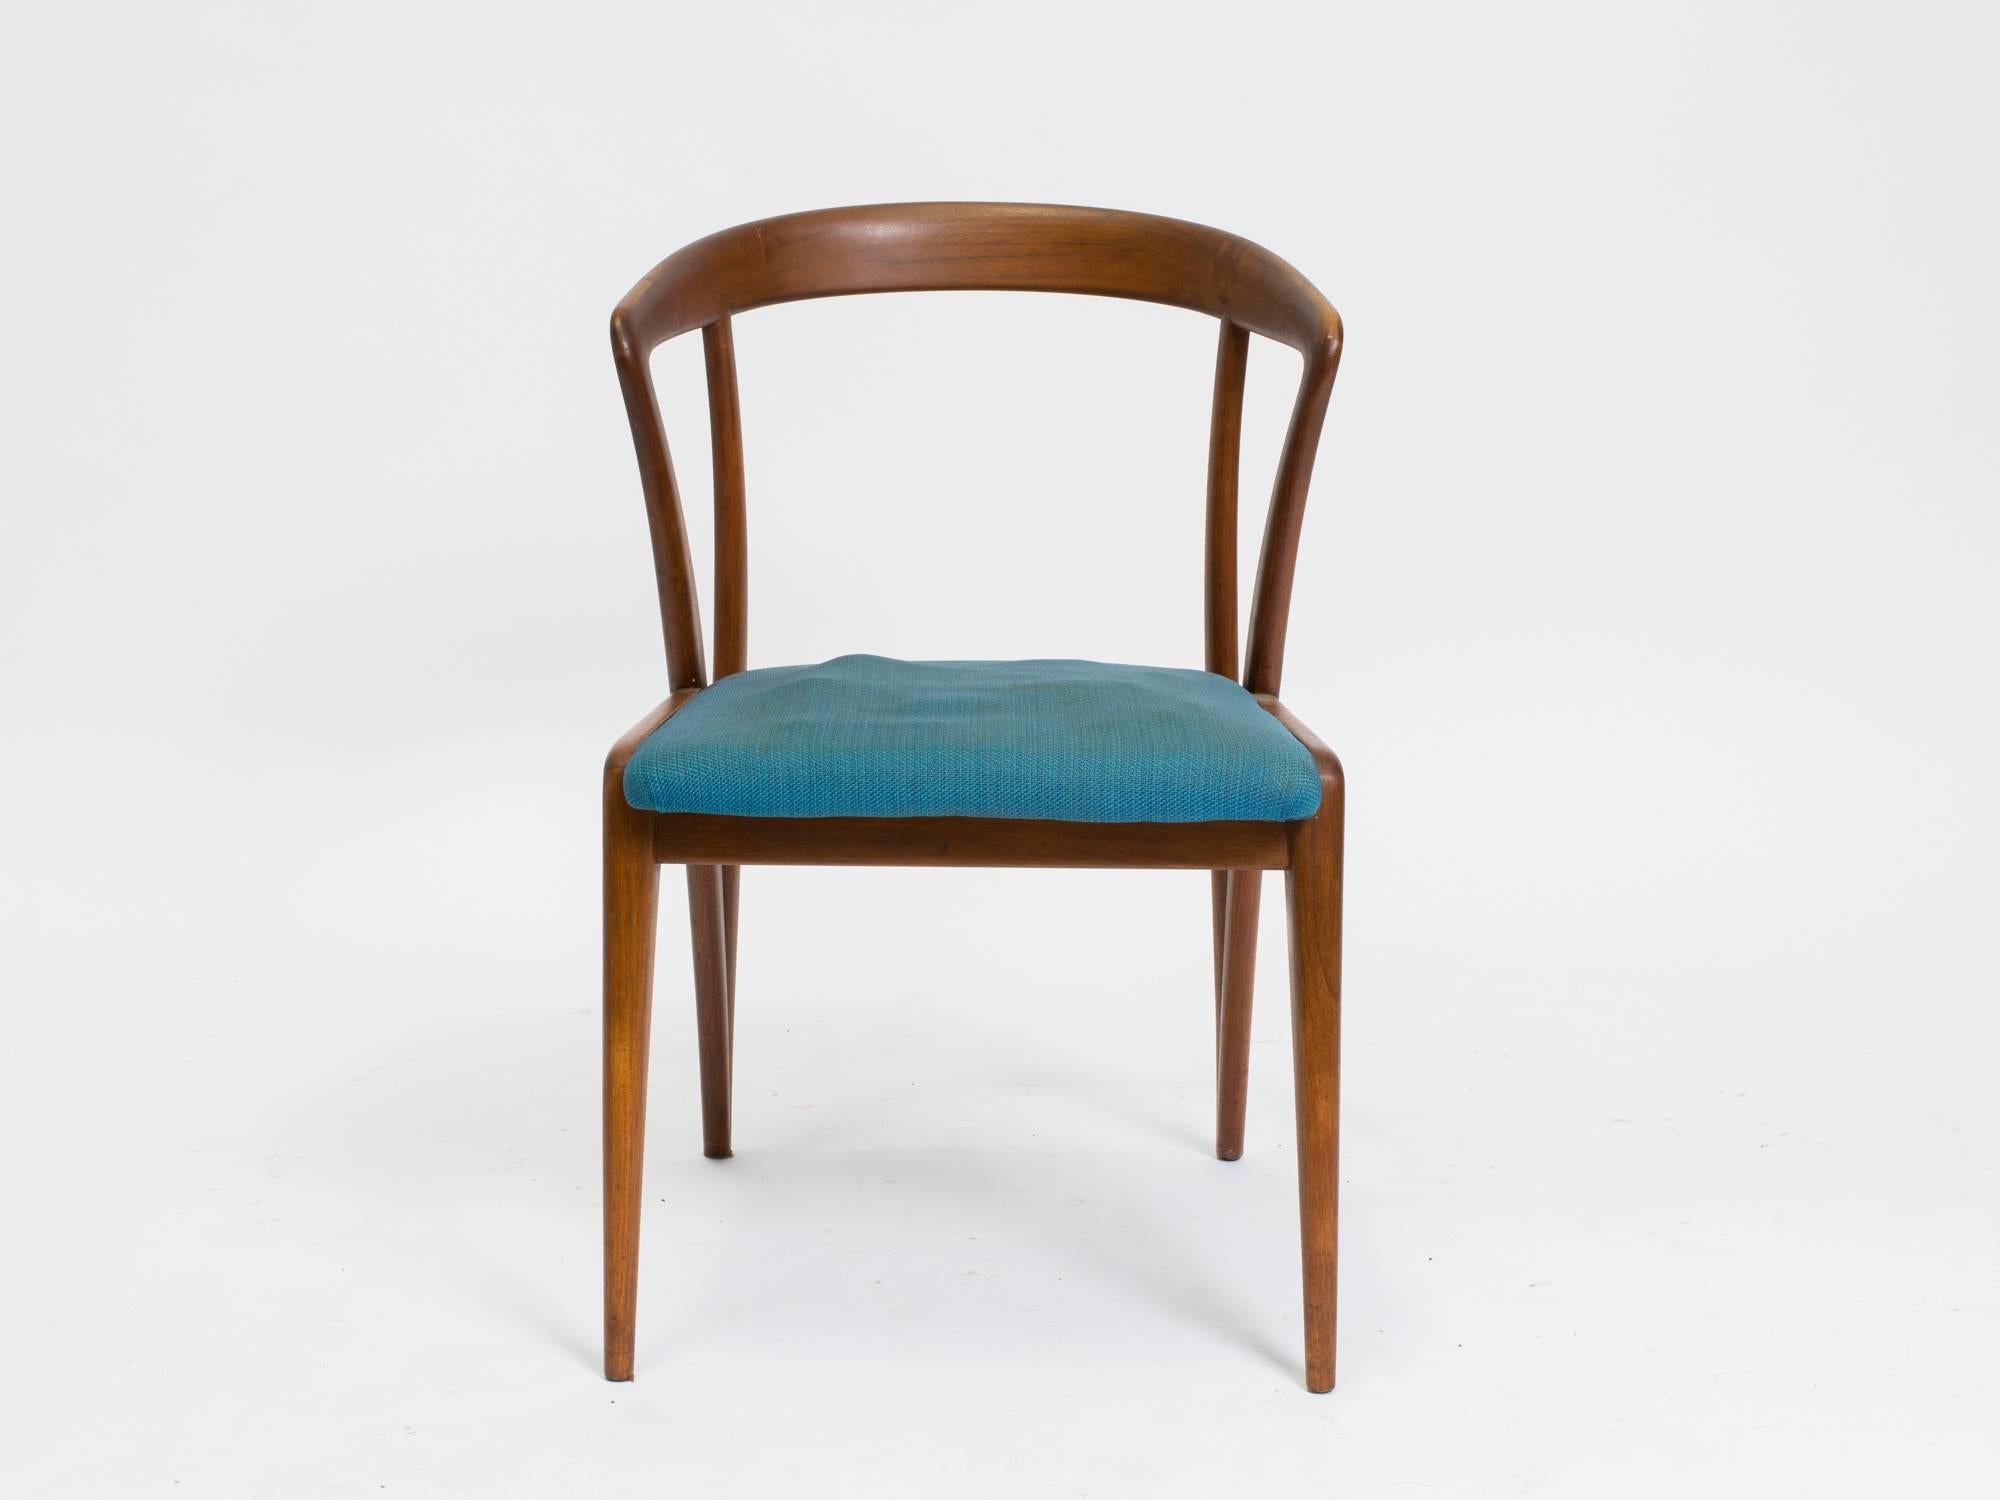 Danish Pair of Bertha Schaefer armchairs for Singer and sons